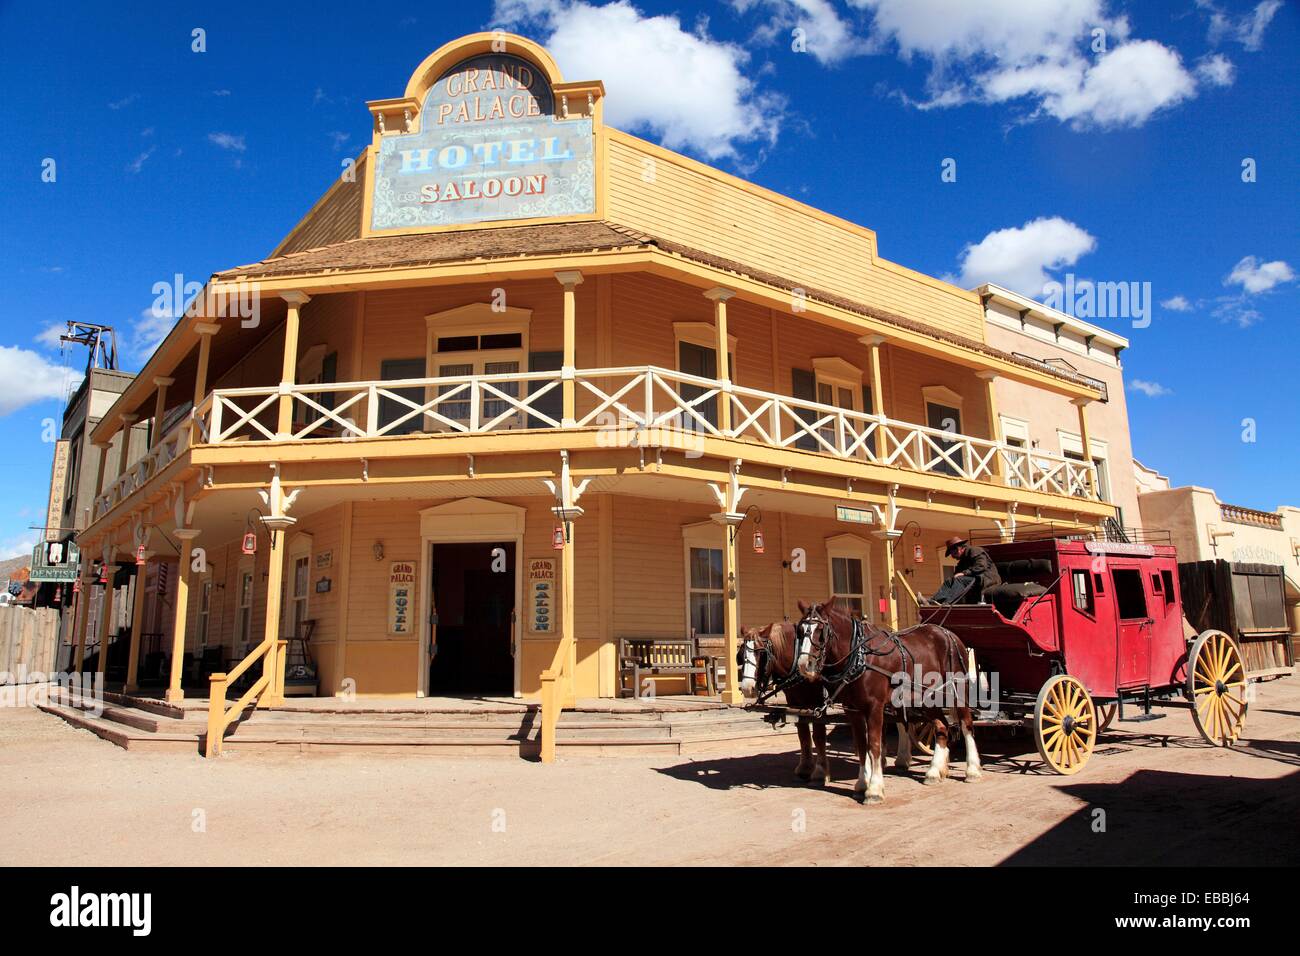 Grand Palace Hotel and Saloon with a horse carriage in Old Tucson Studio. Tucson. Arizona. USA. Stock Photo